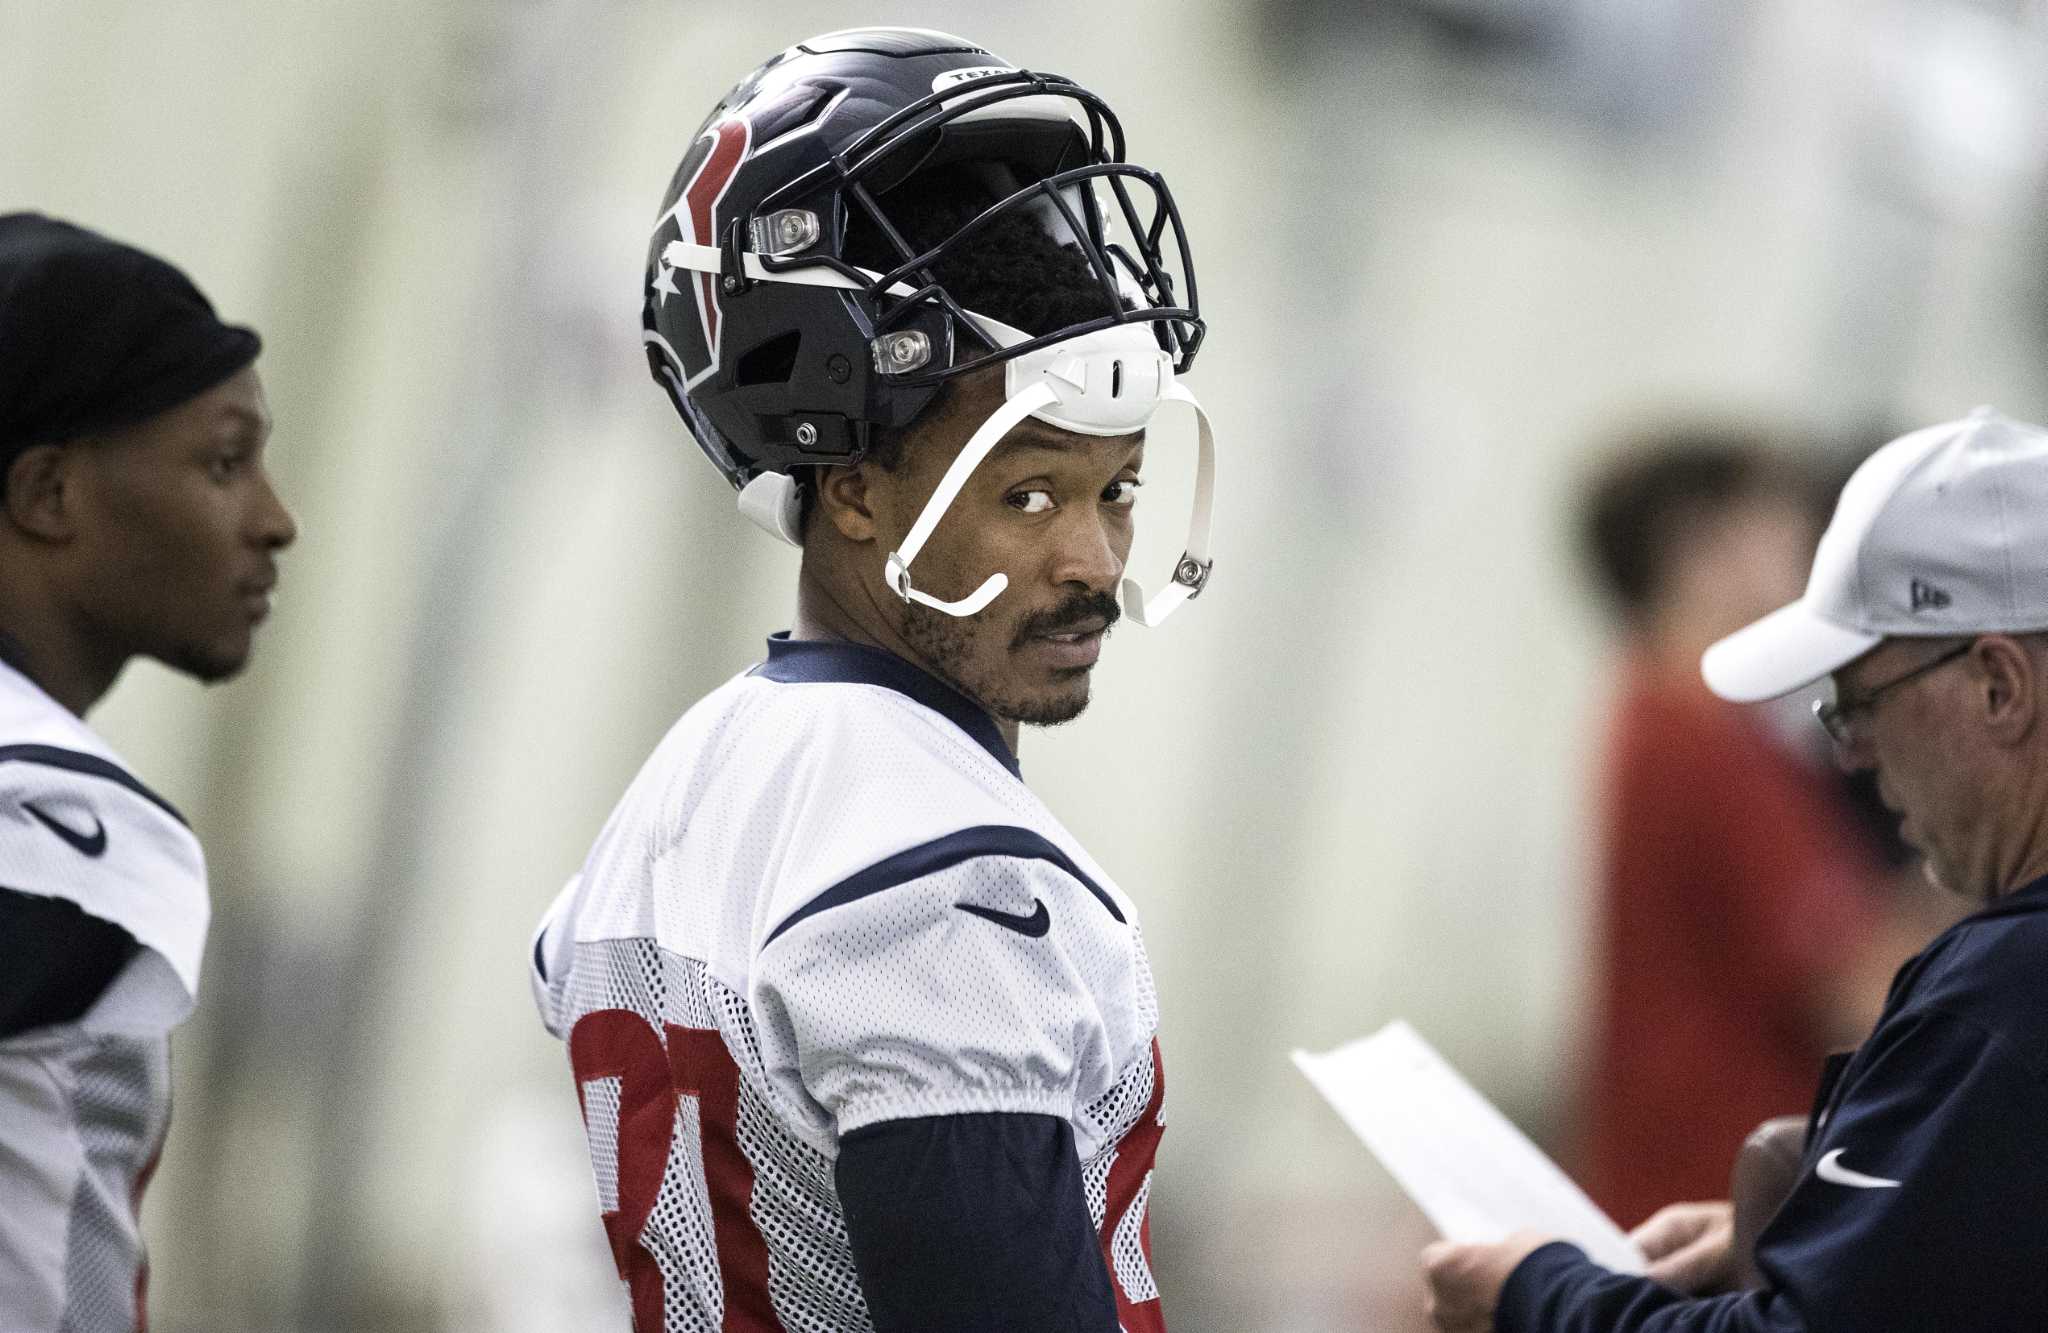 Now that he's settled in, Demaryius Thomas can't wait to help Texans